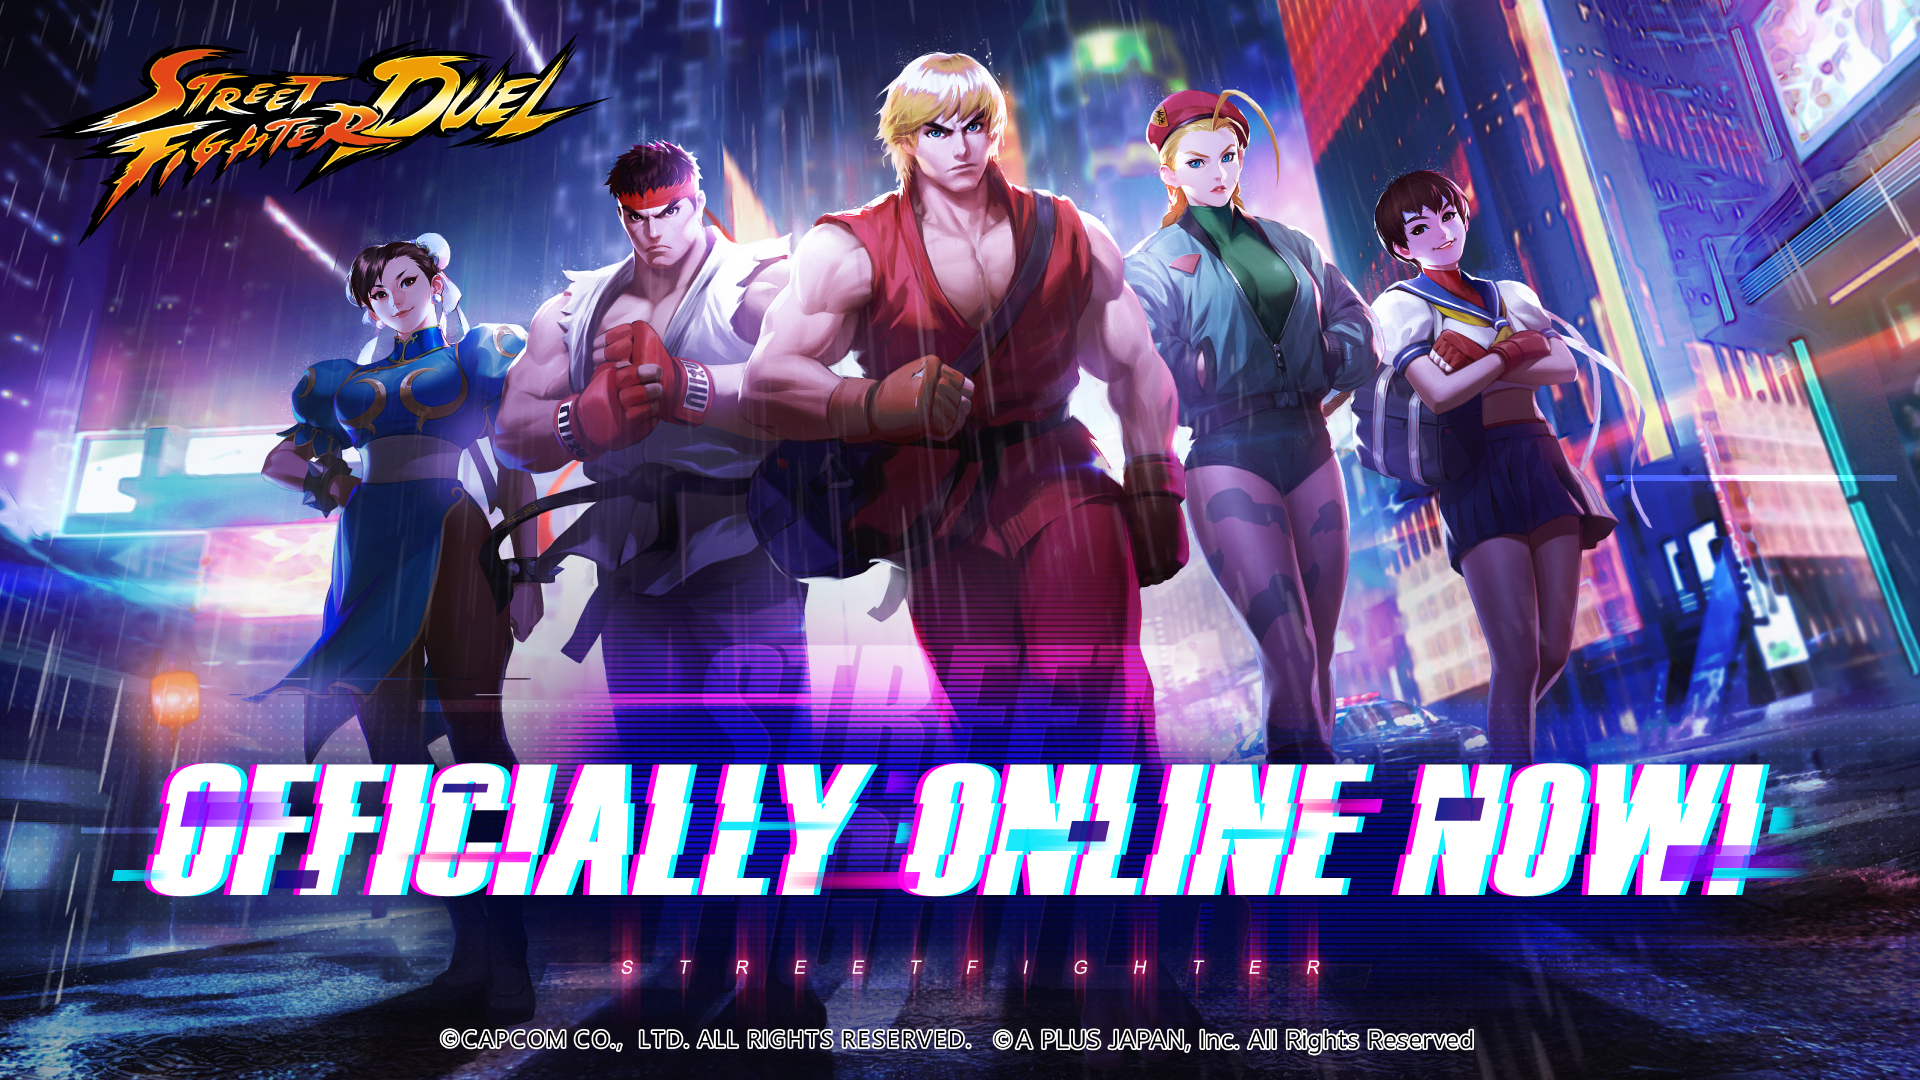 Crunchyroll Games Launches Street Fighter: Duel Mobile Game in